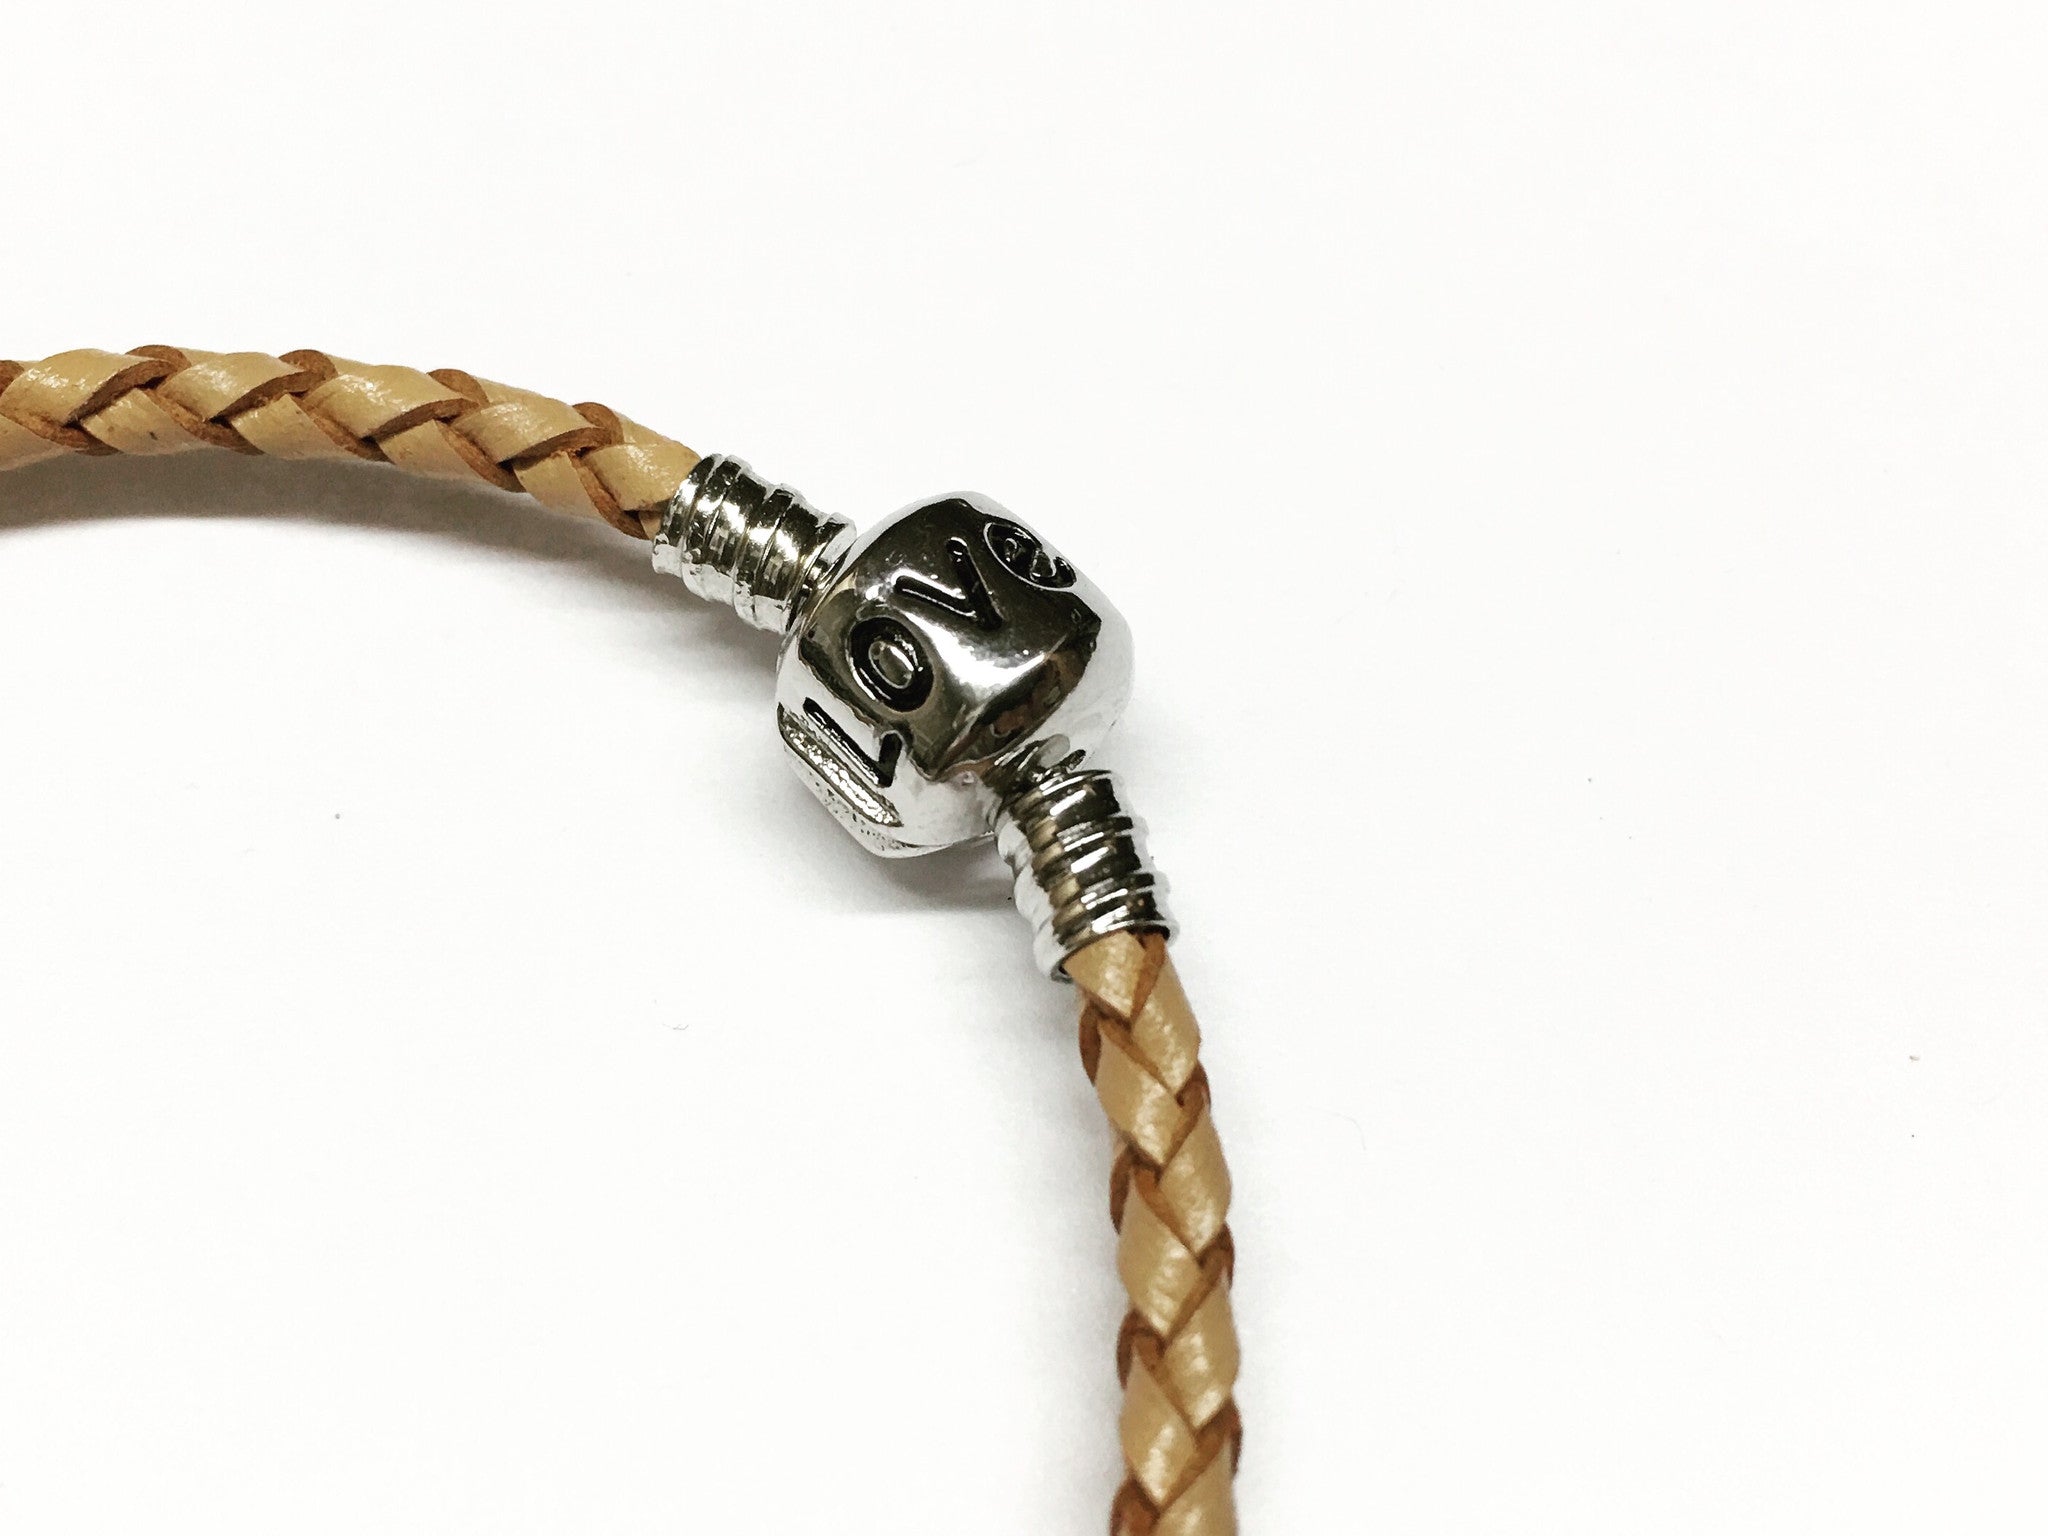 Equestrian Baided Leather Bracelet